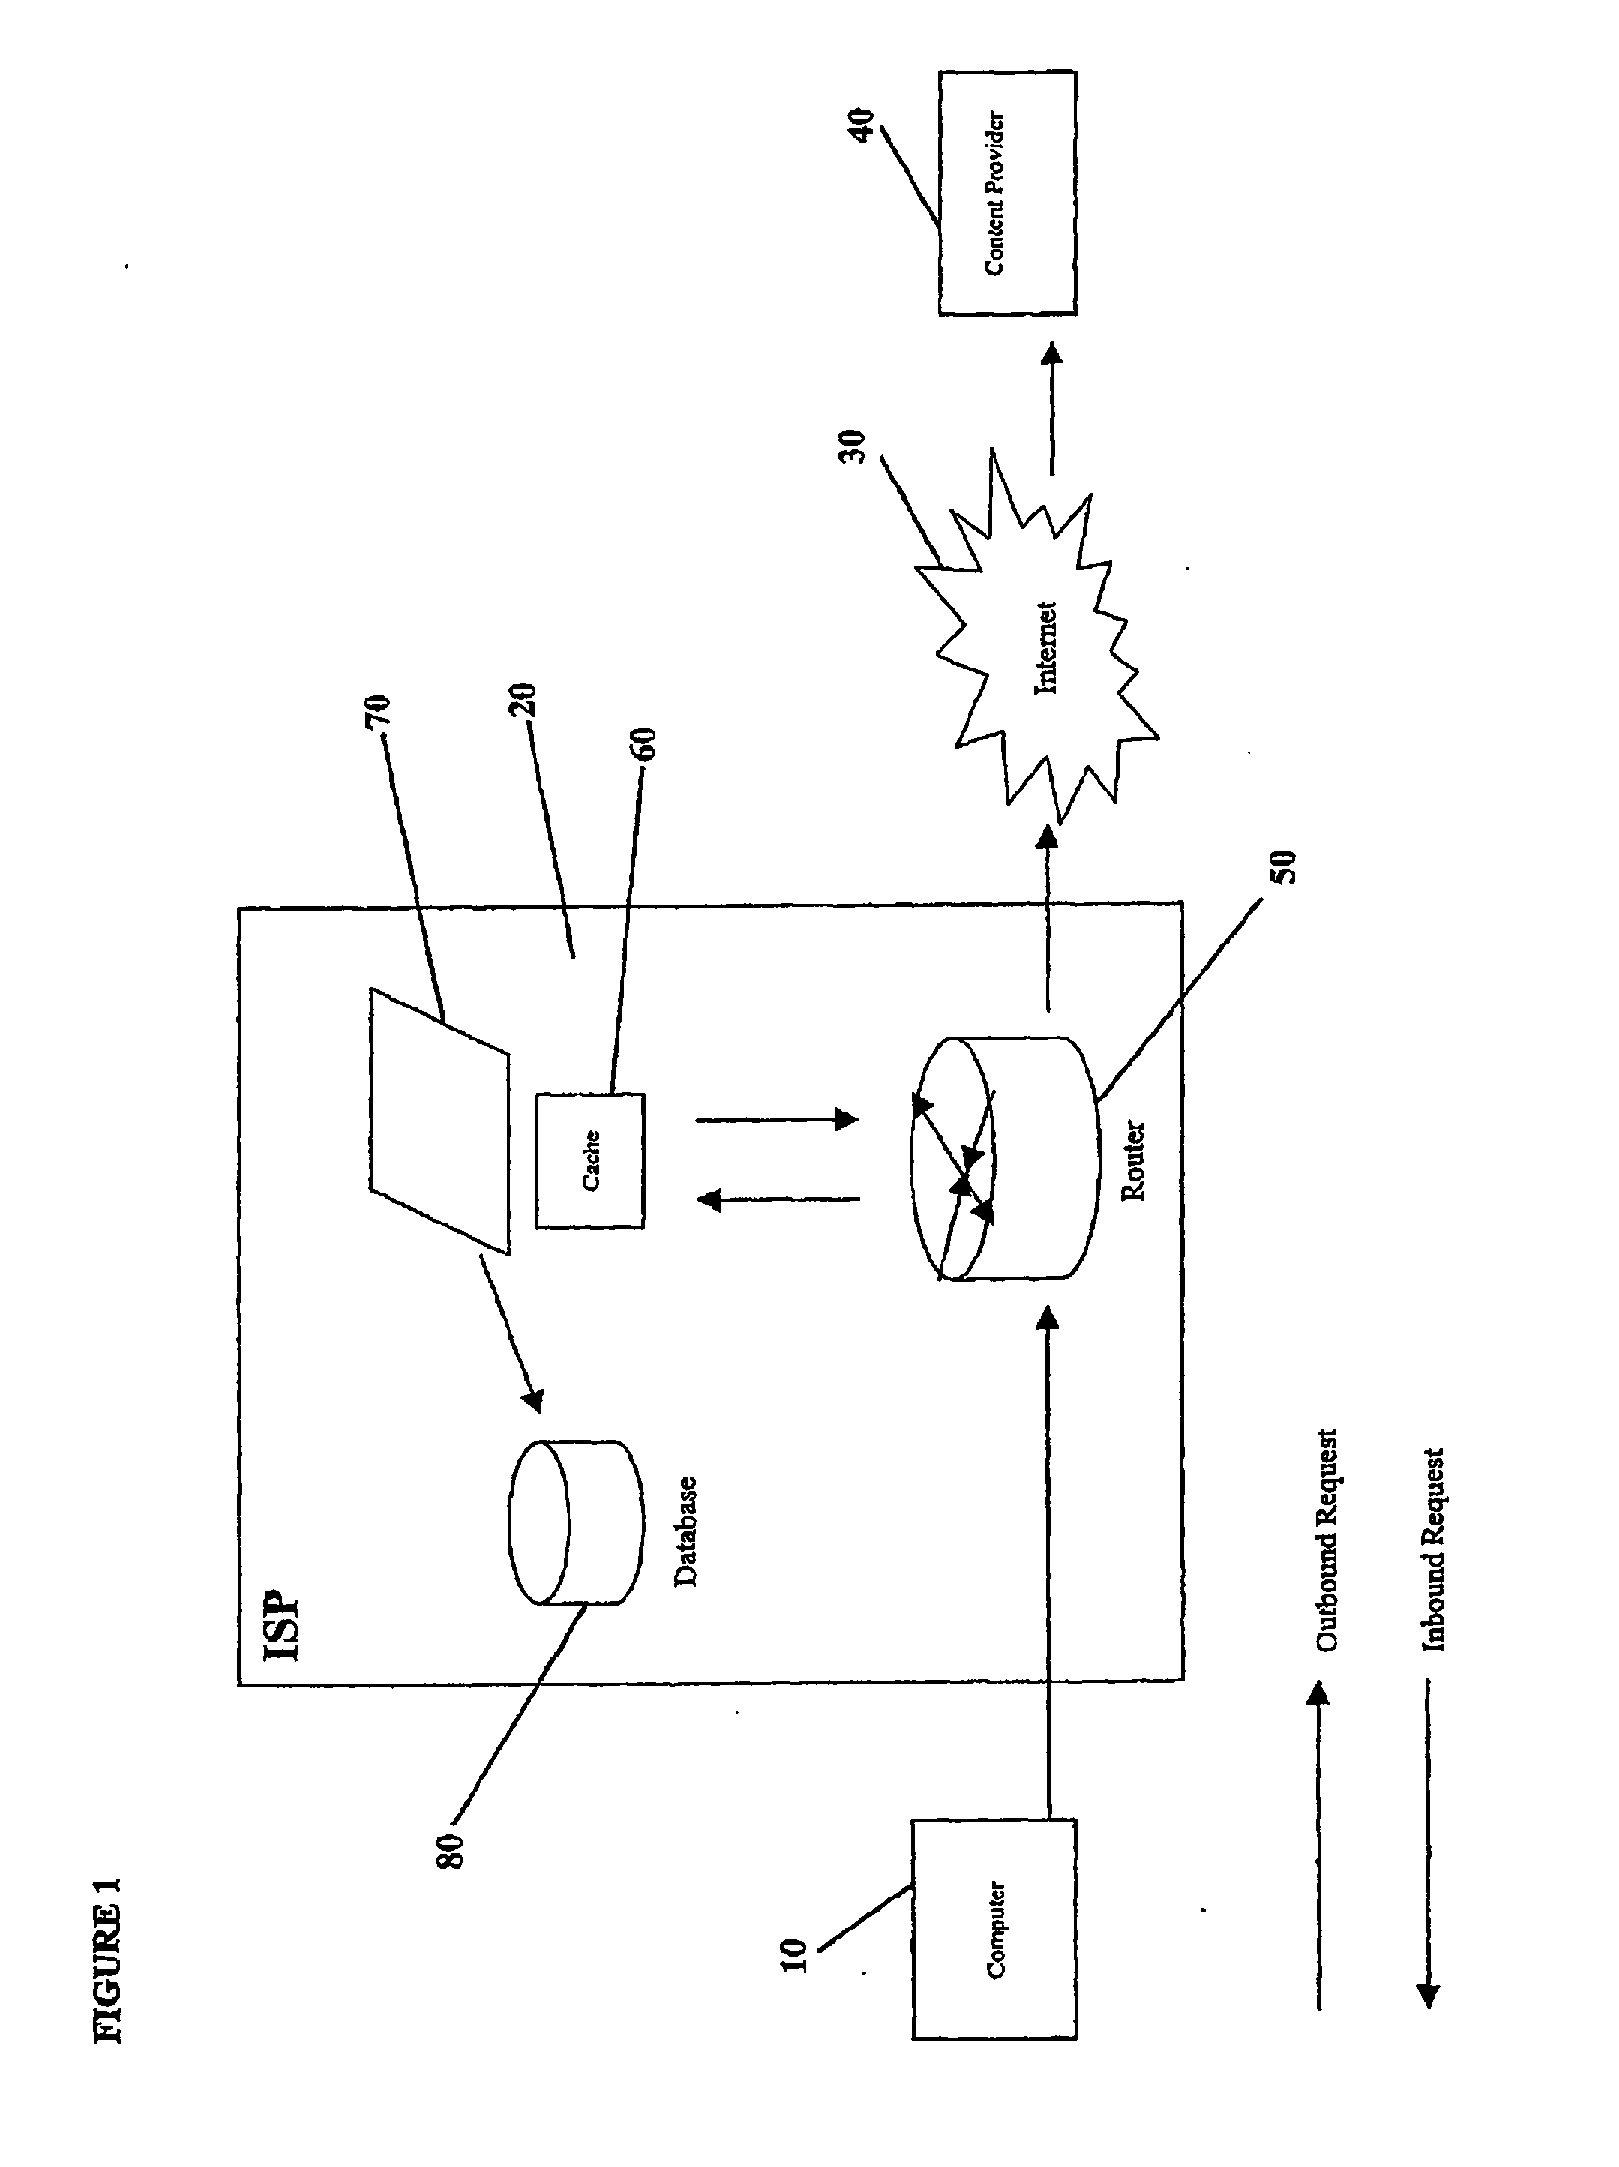 Method and system to aggregate data in a network